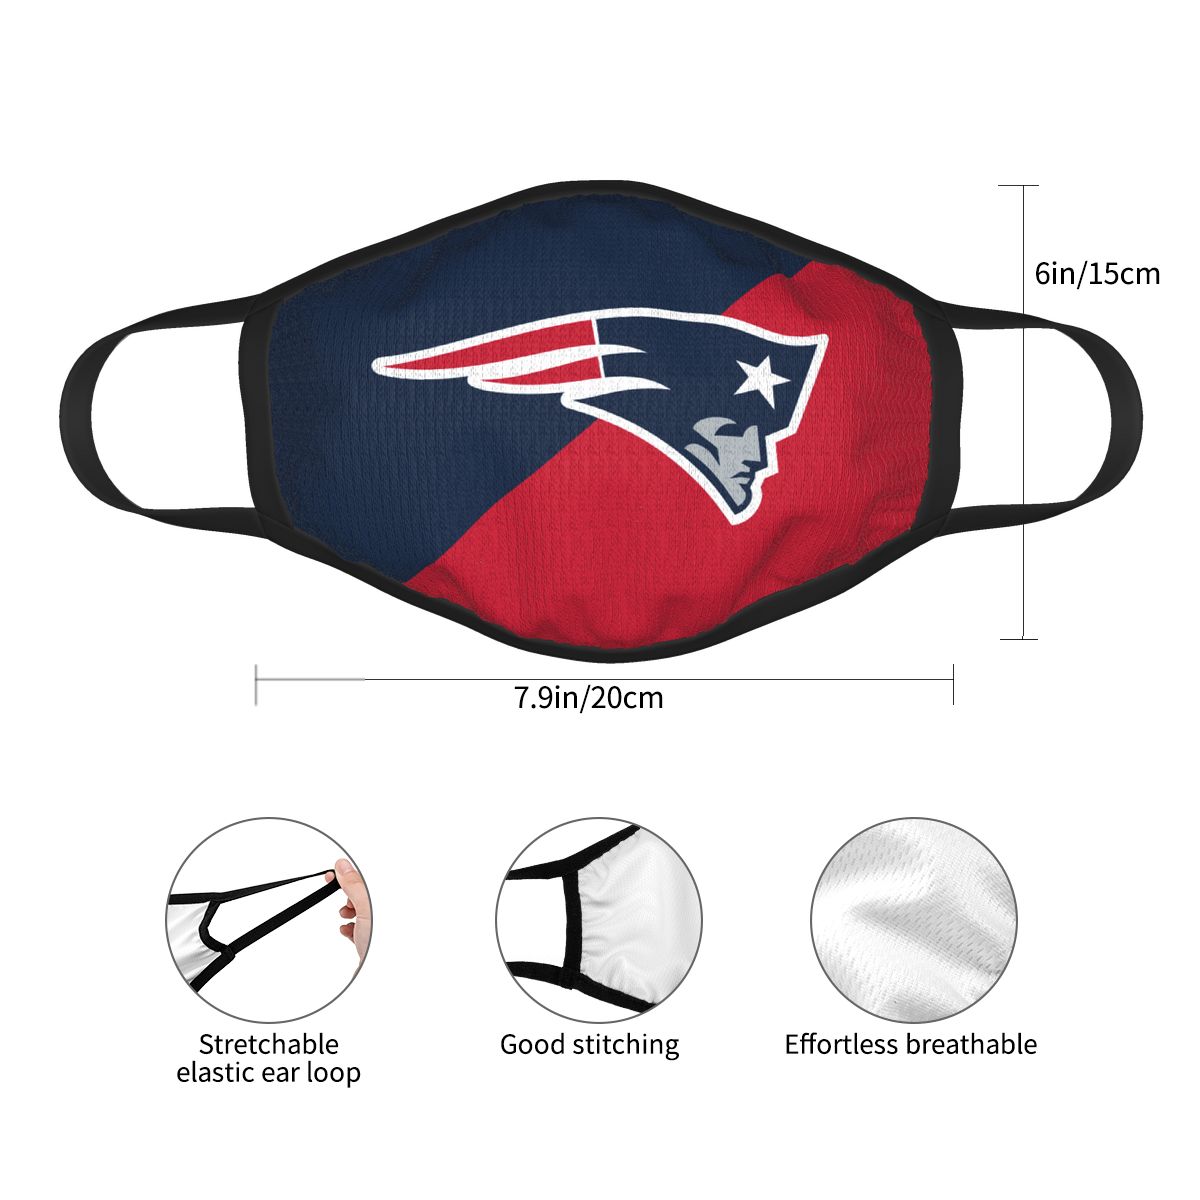 Custom Football Personalized New England Patriots Dust Face Mask With Filters PM 2.5